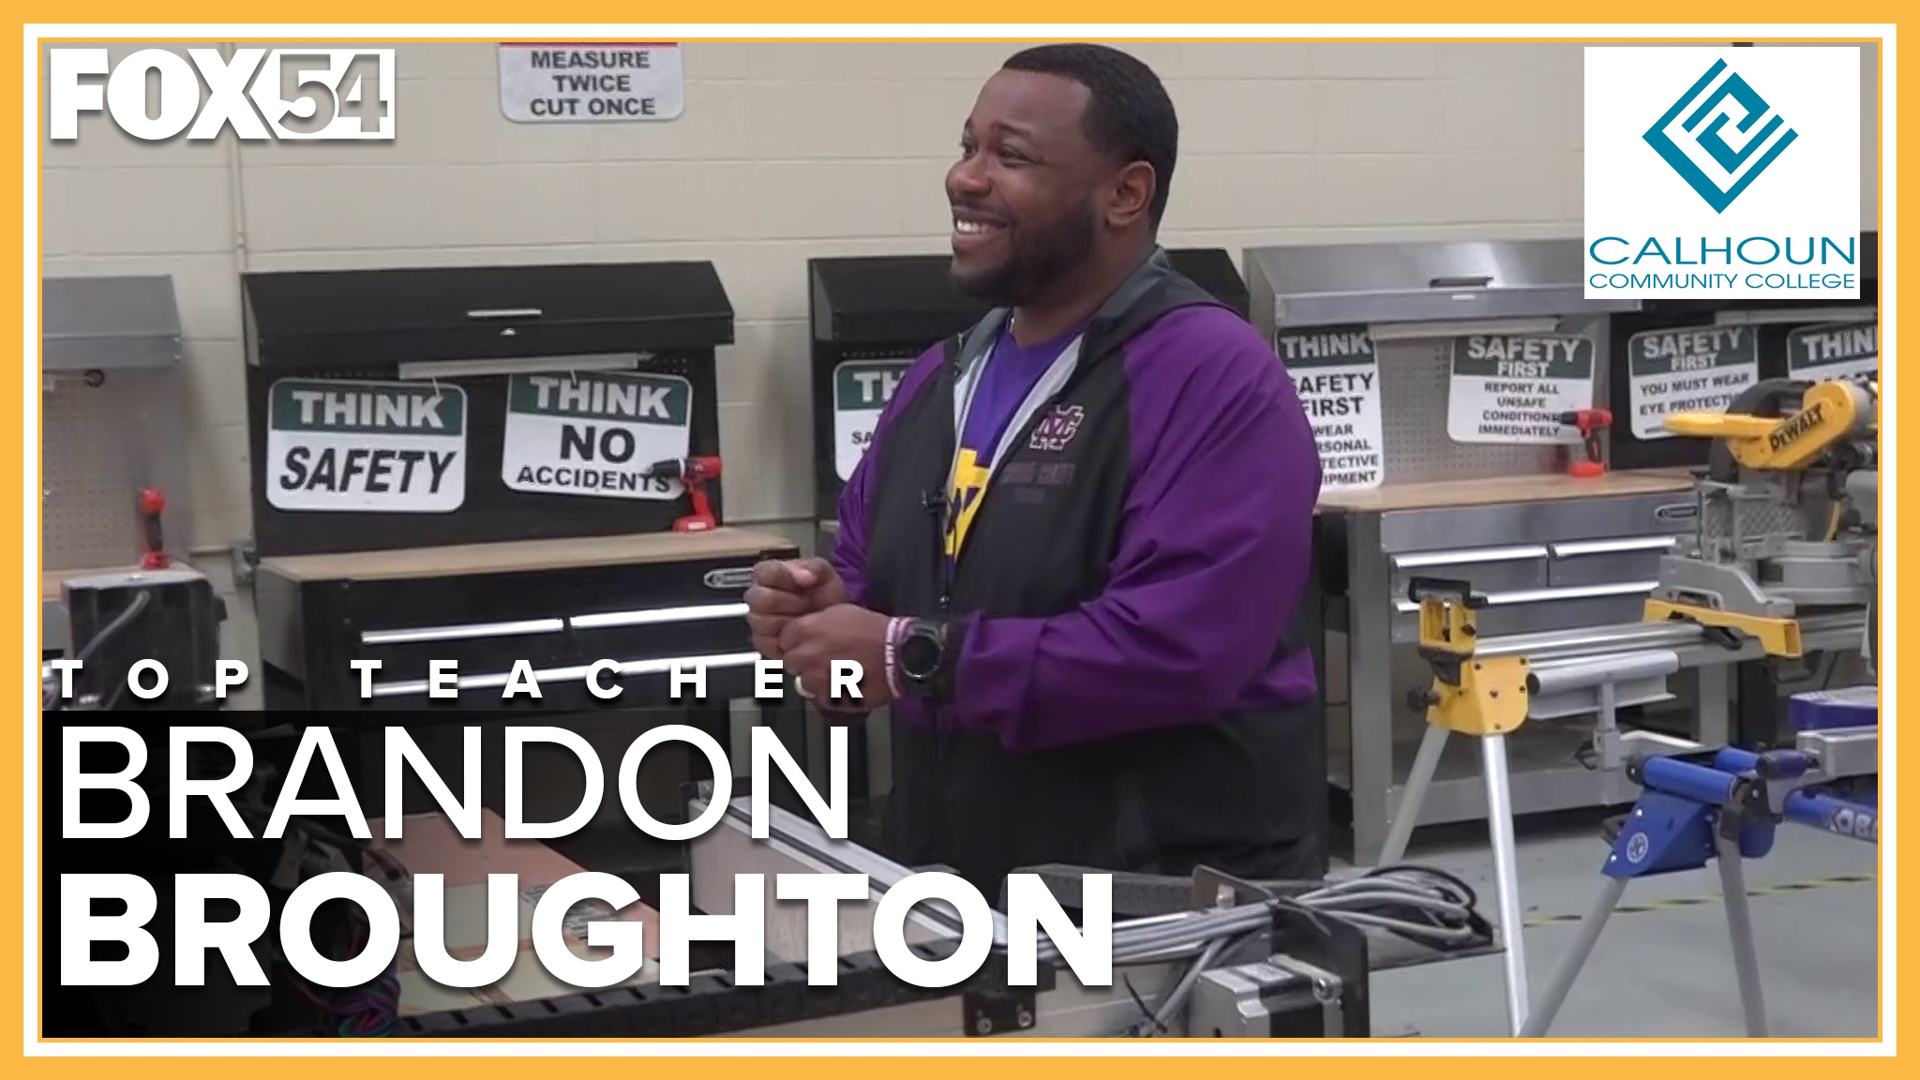 Brandon Broughton wears many hats. From coach to agriscience teacher, it's no wonder he was nominated for The Valley's Top Teacher!